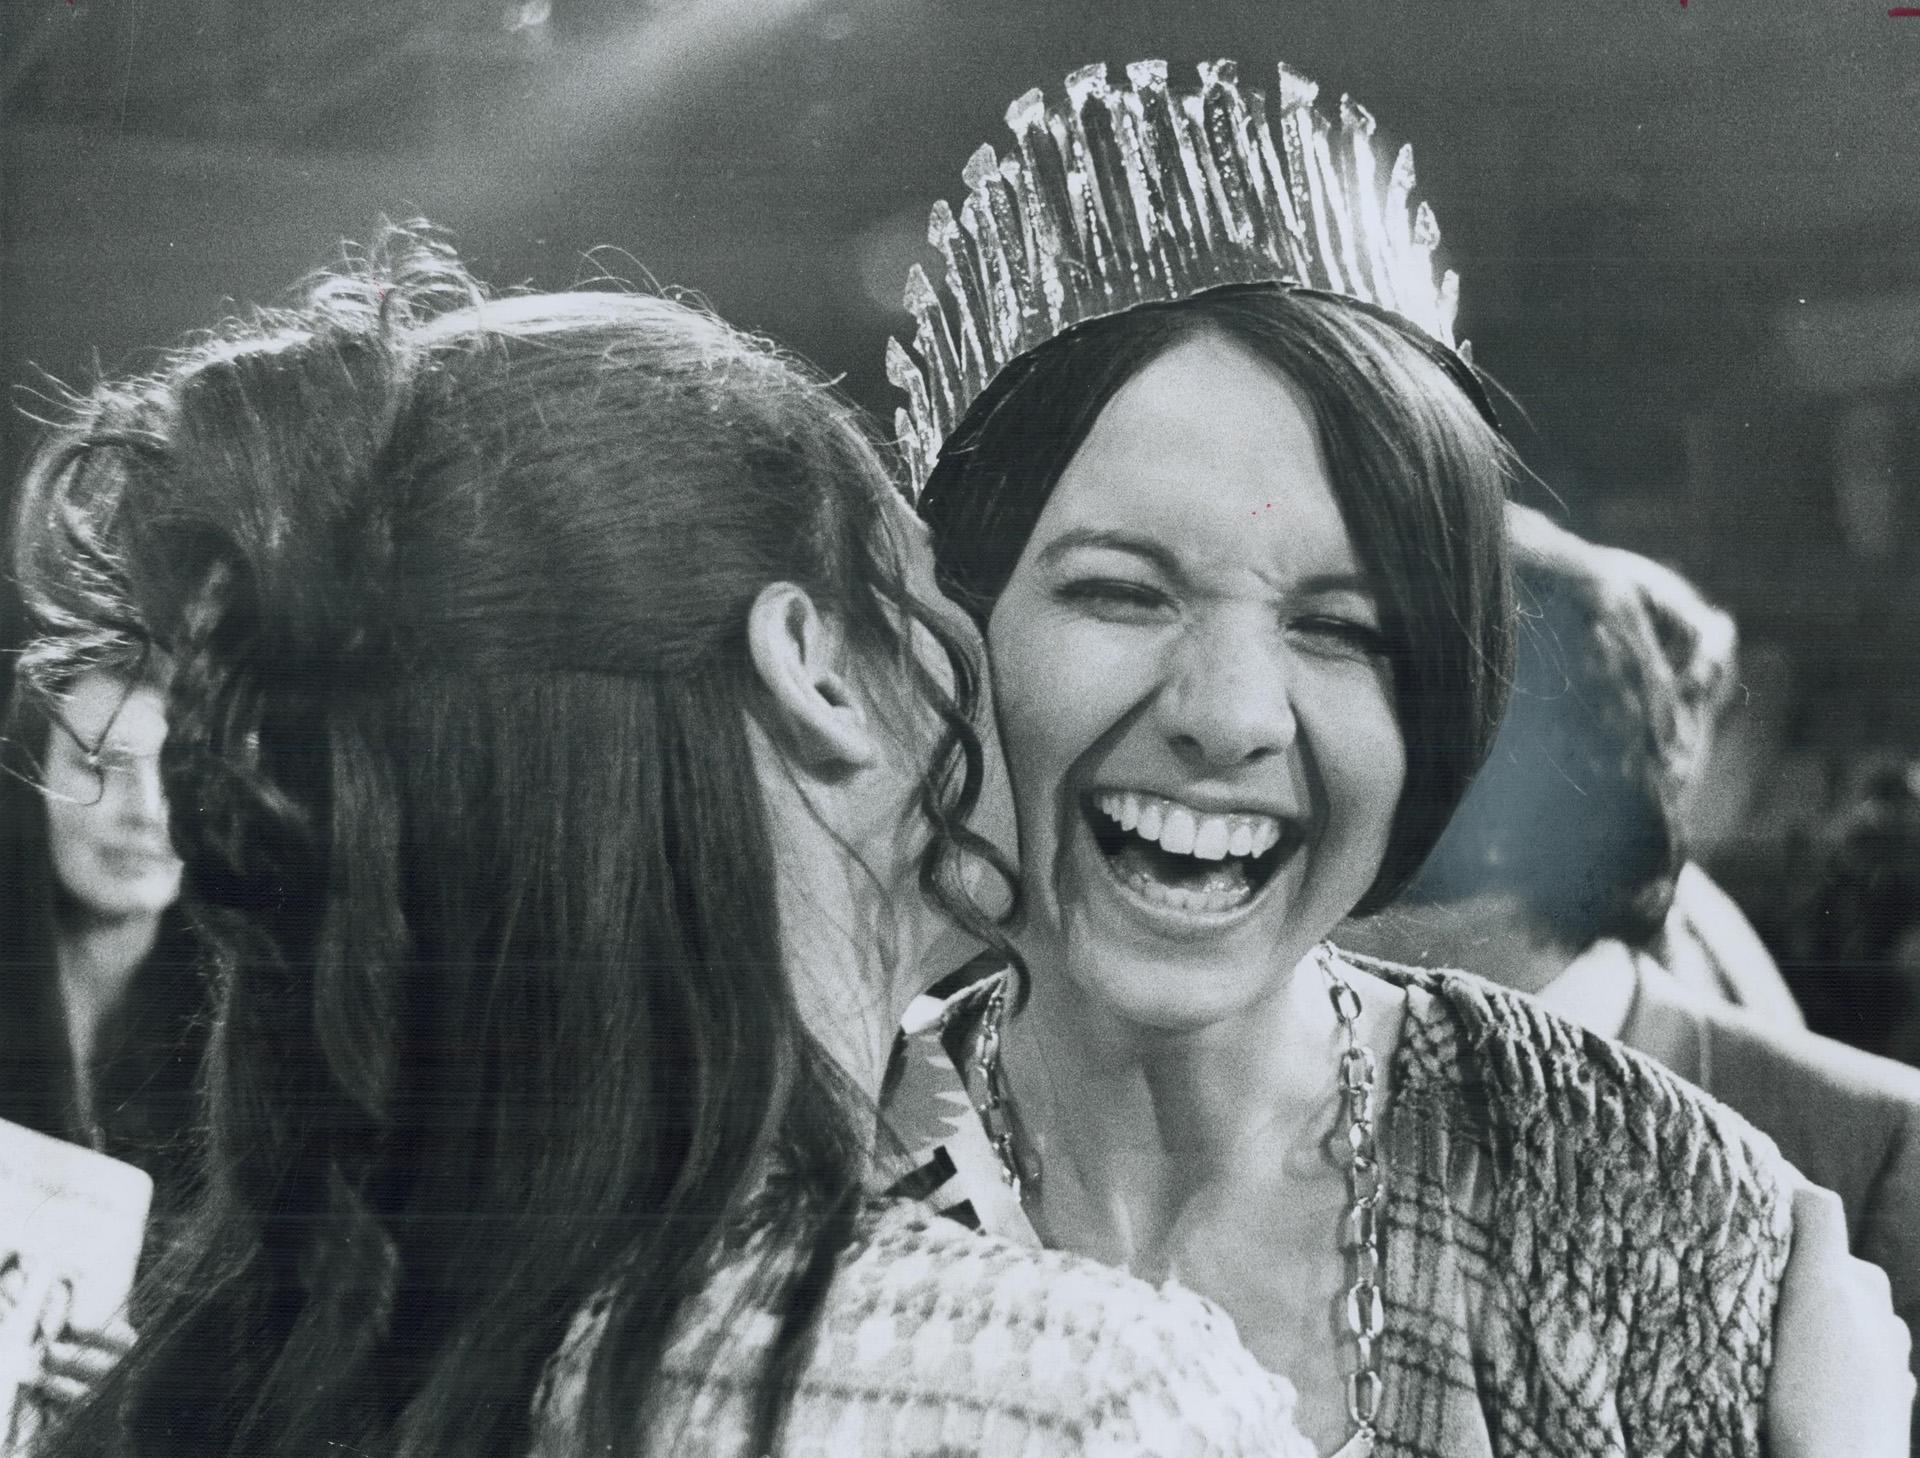 Miss Canada didn't even cry, Carol Commisso, 18, last night became Miss